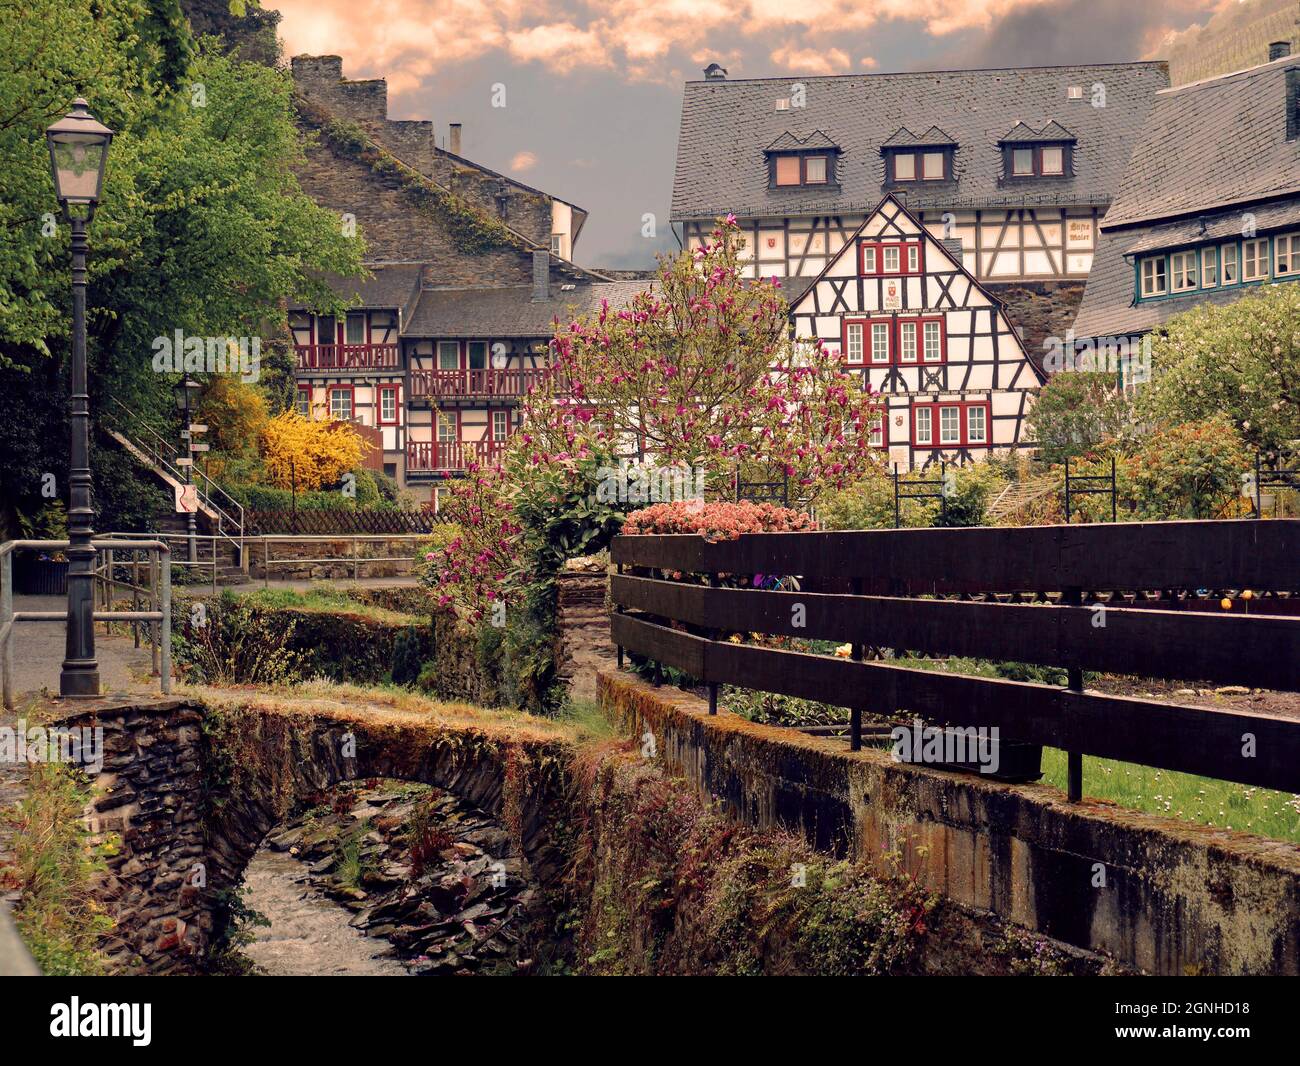 Architecture in Town of Bacharach, Germany Stock Photo